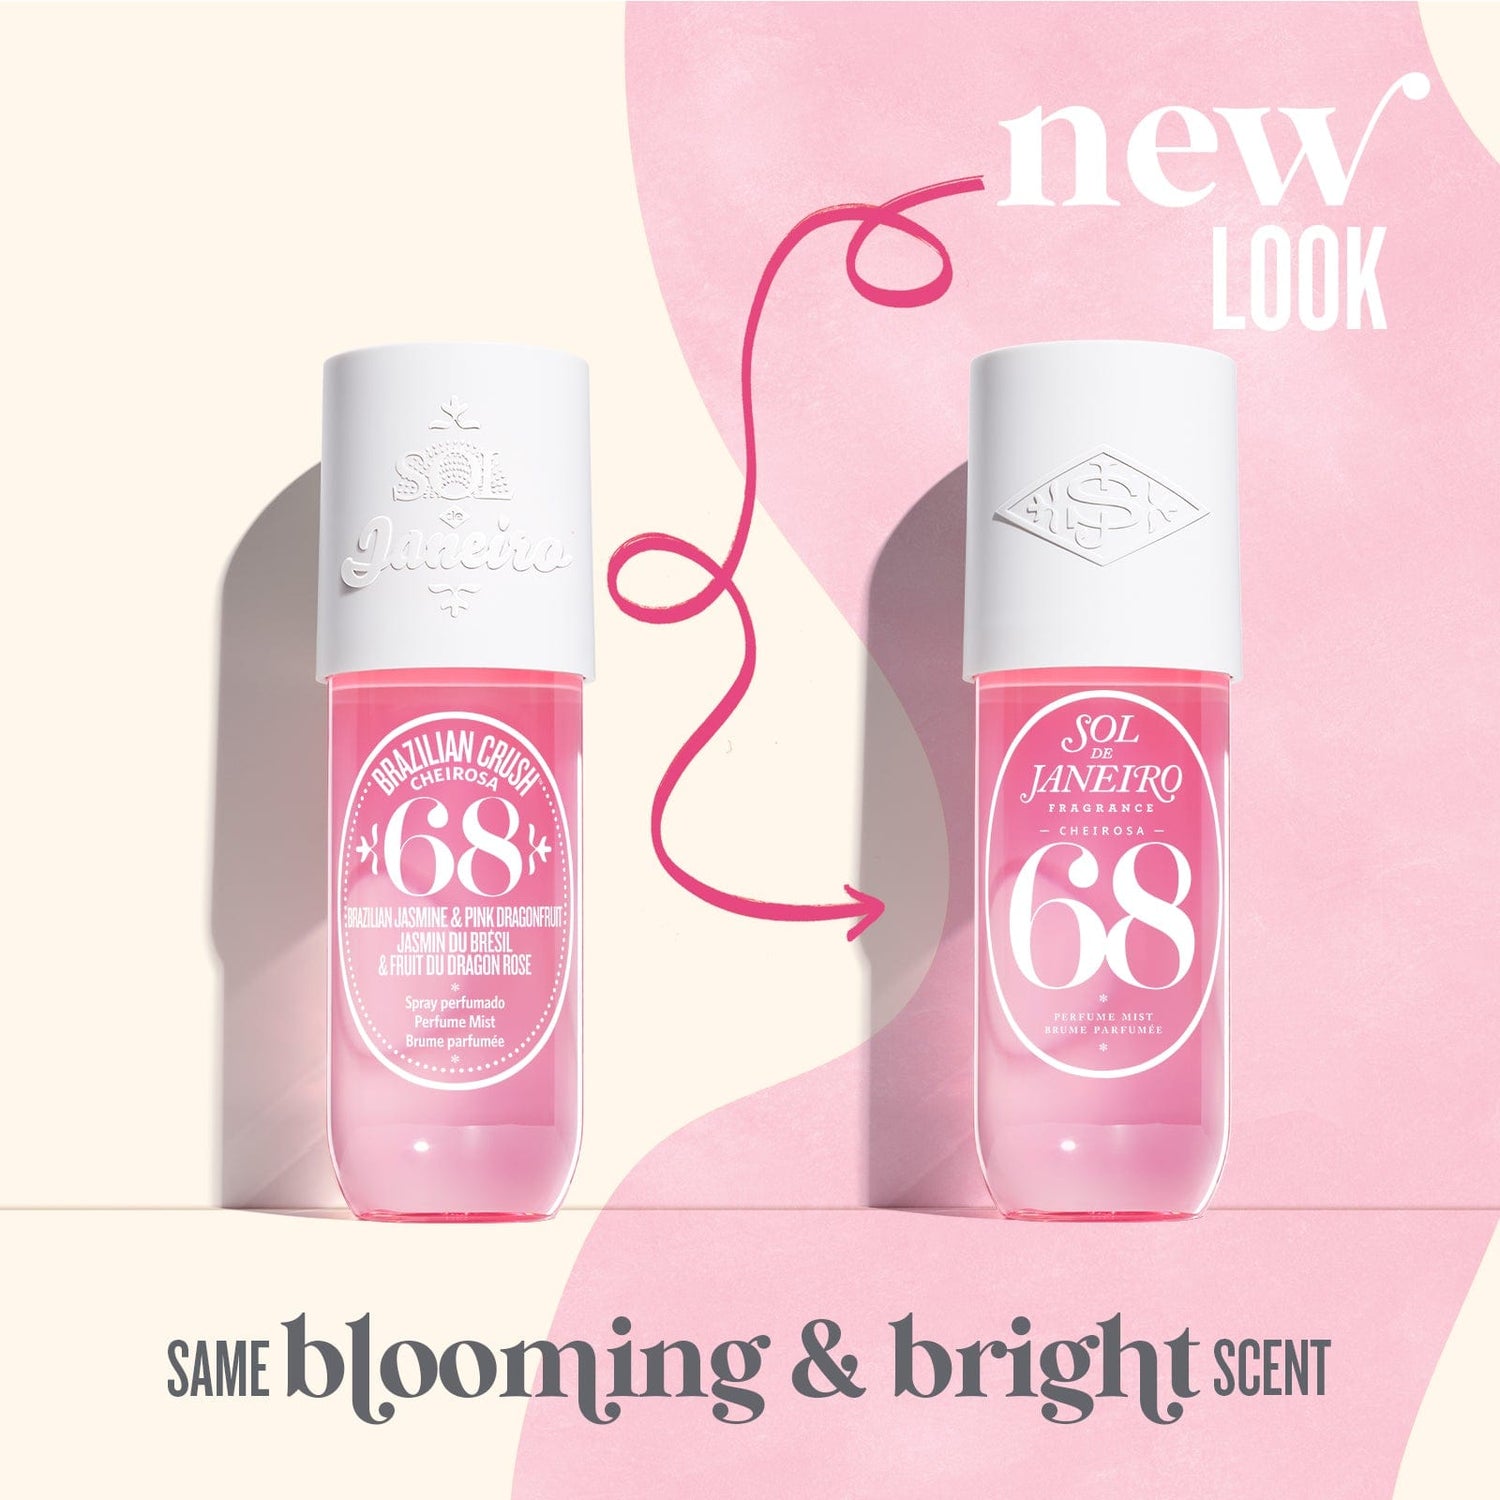 New Look - Same blooming &amp; bright scent